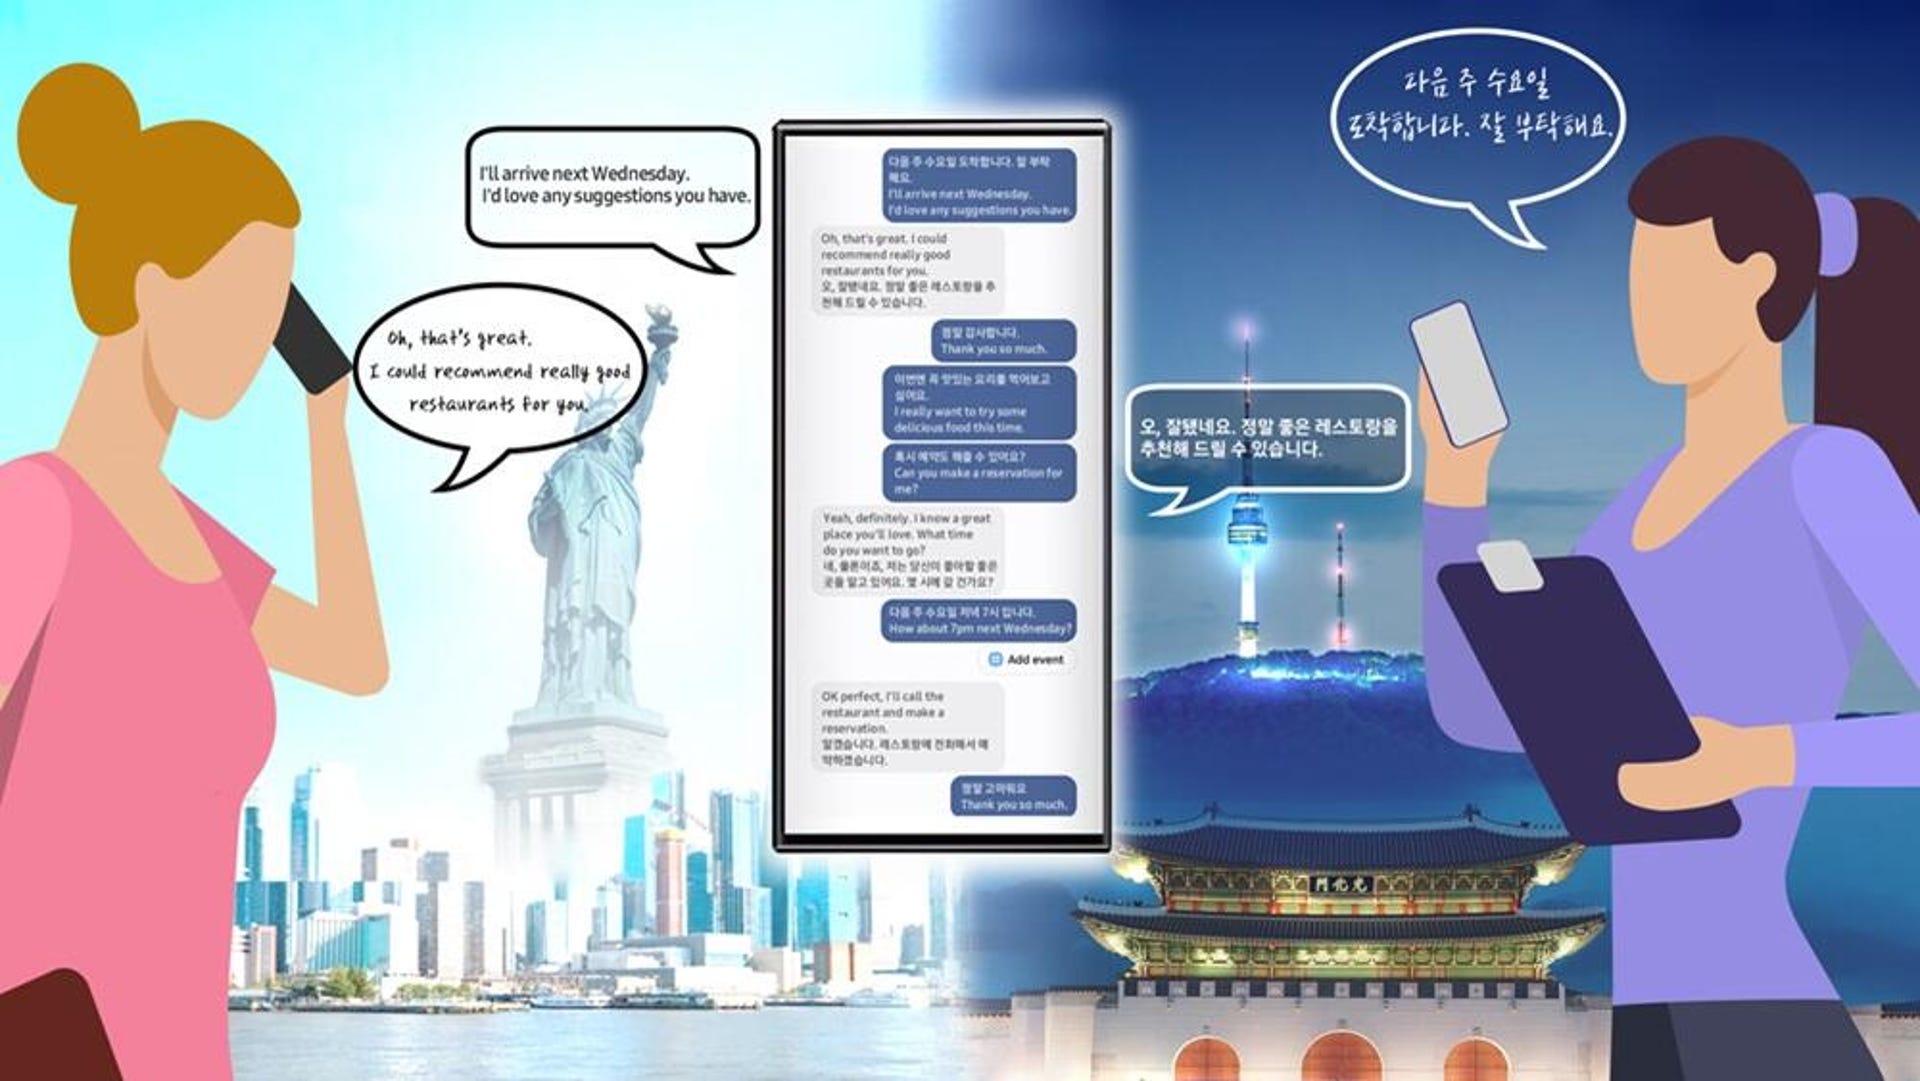 Samsung's promotional artwork for its AI Live Call Translation feature